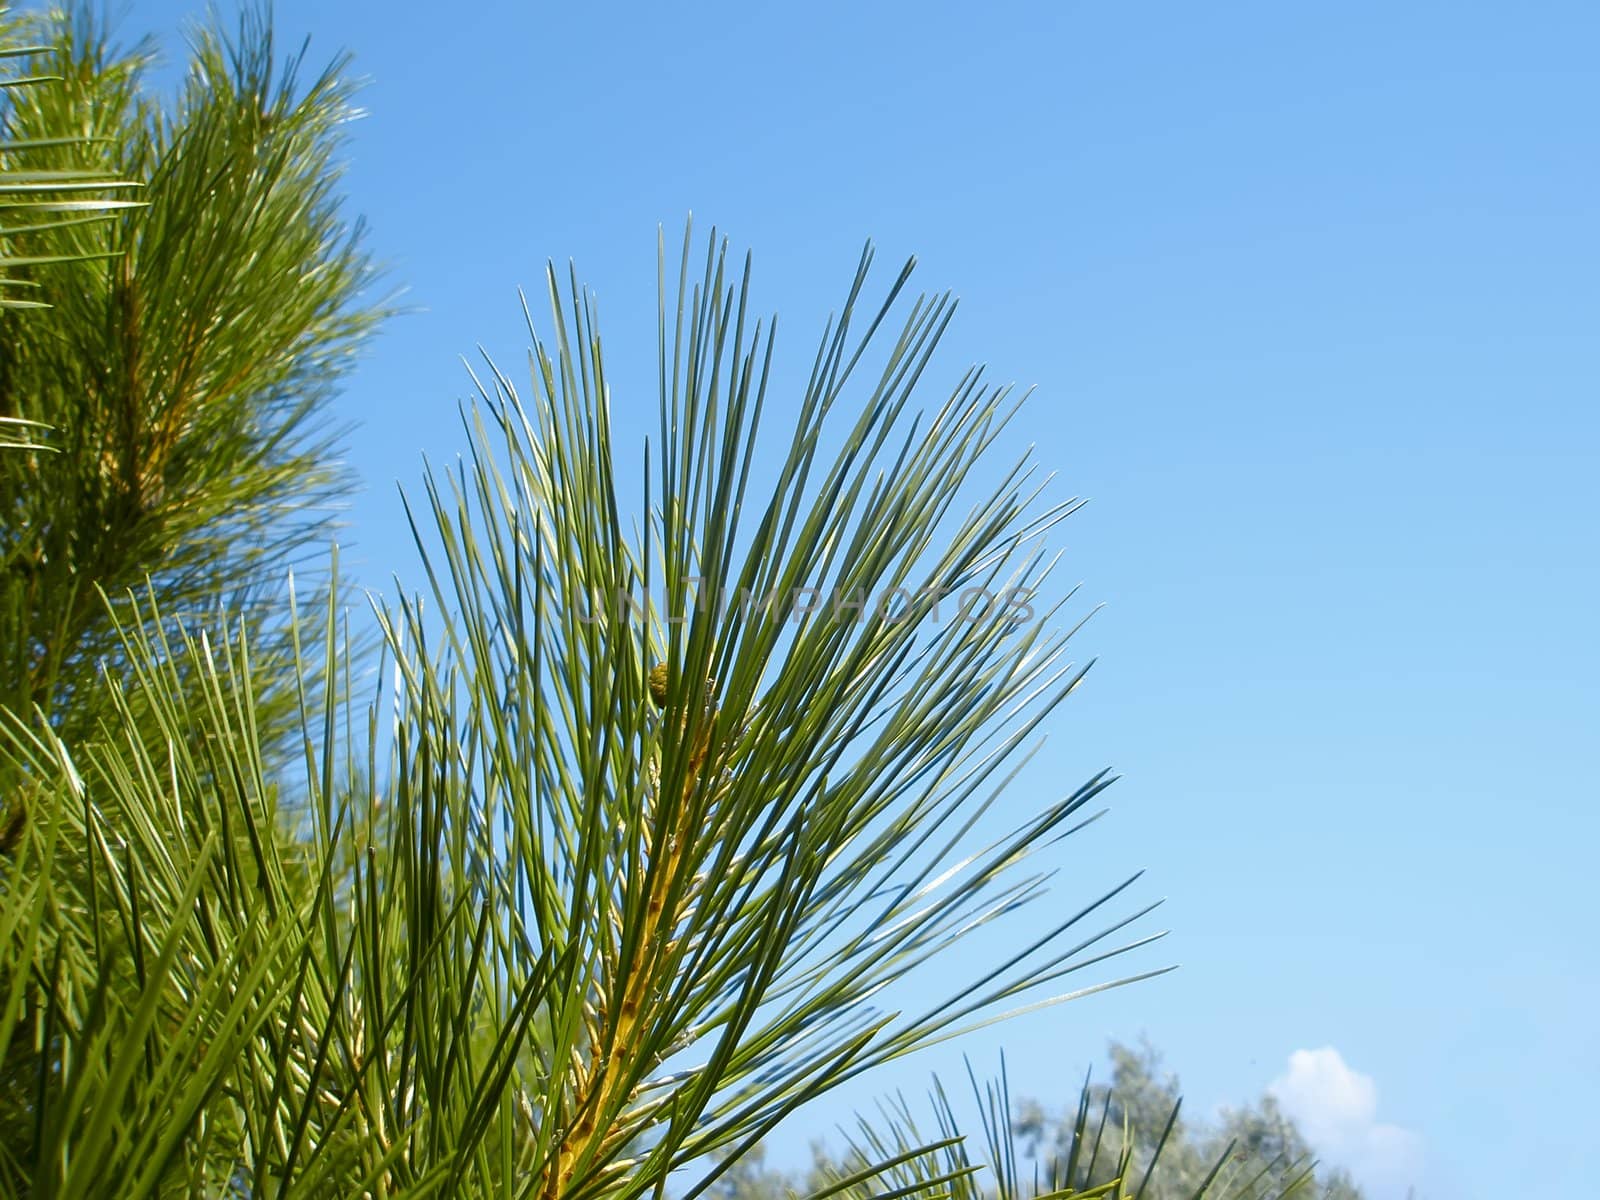 Young shoots of pine trees against blue sky 